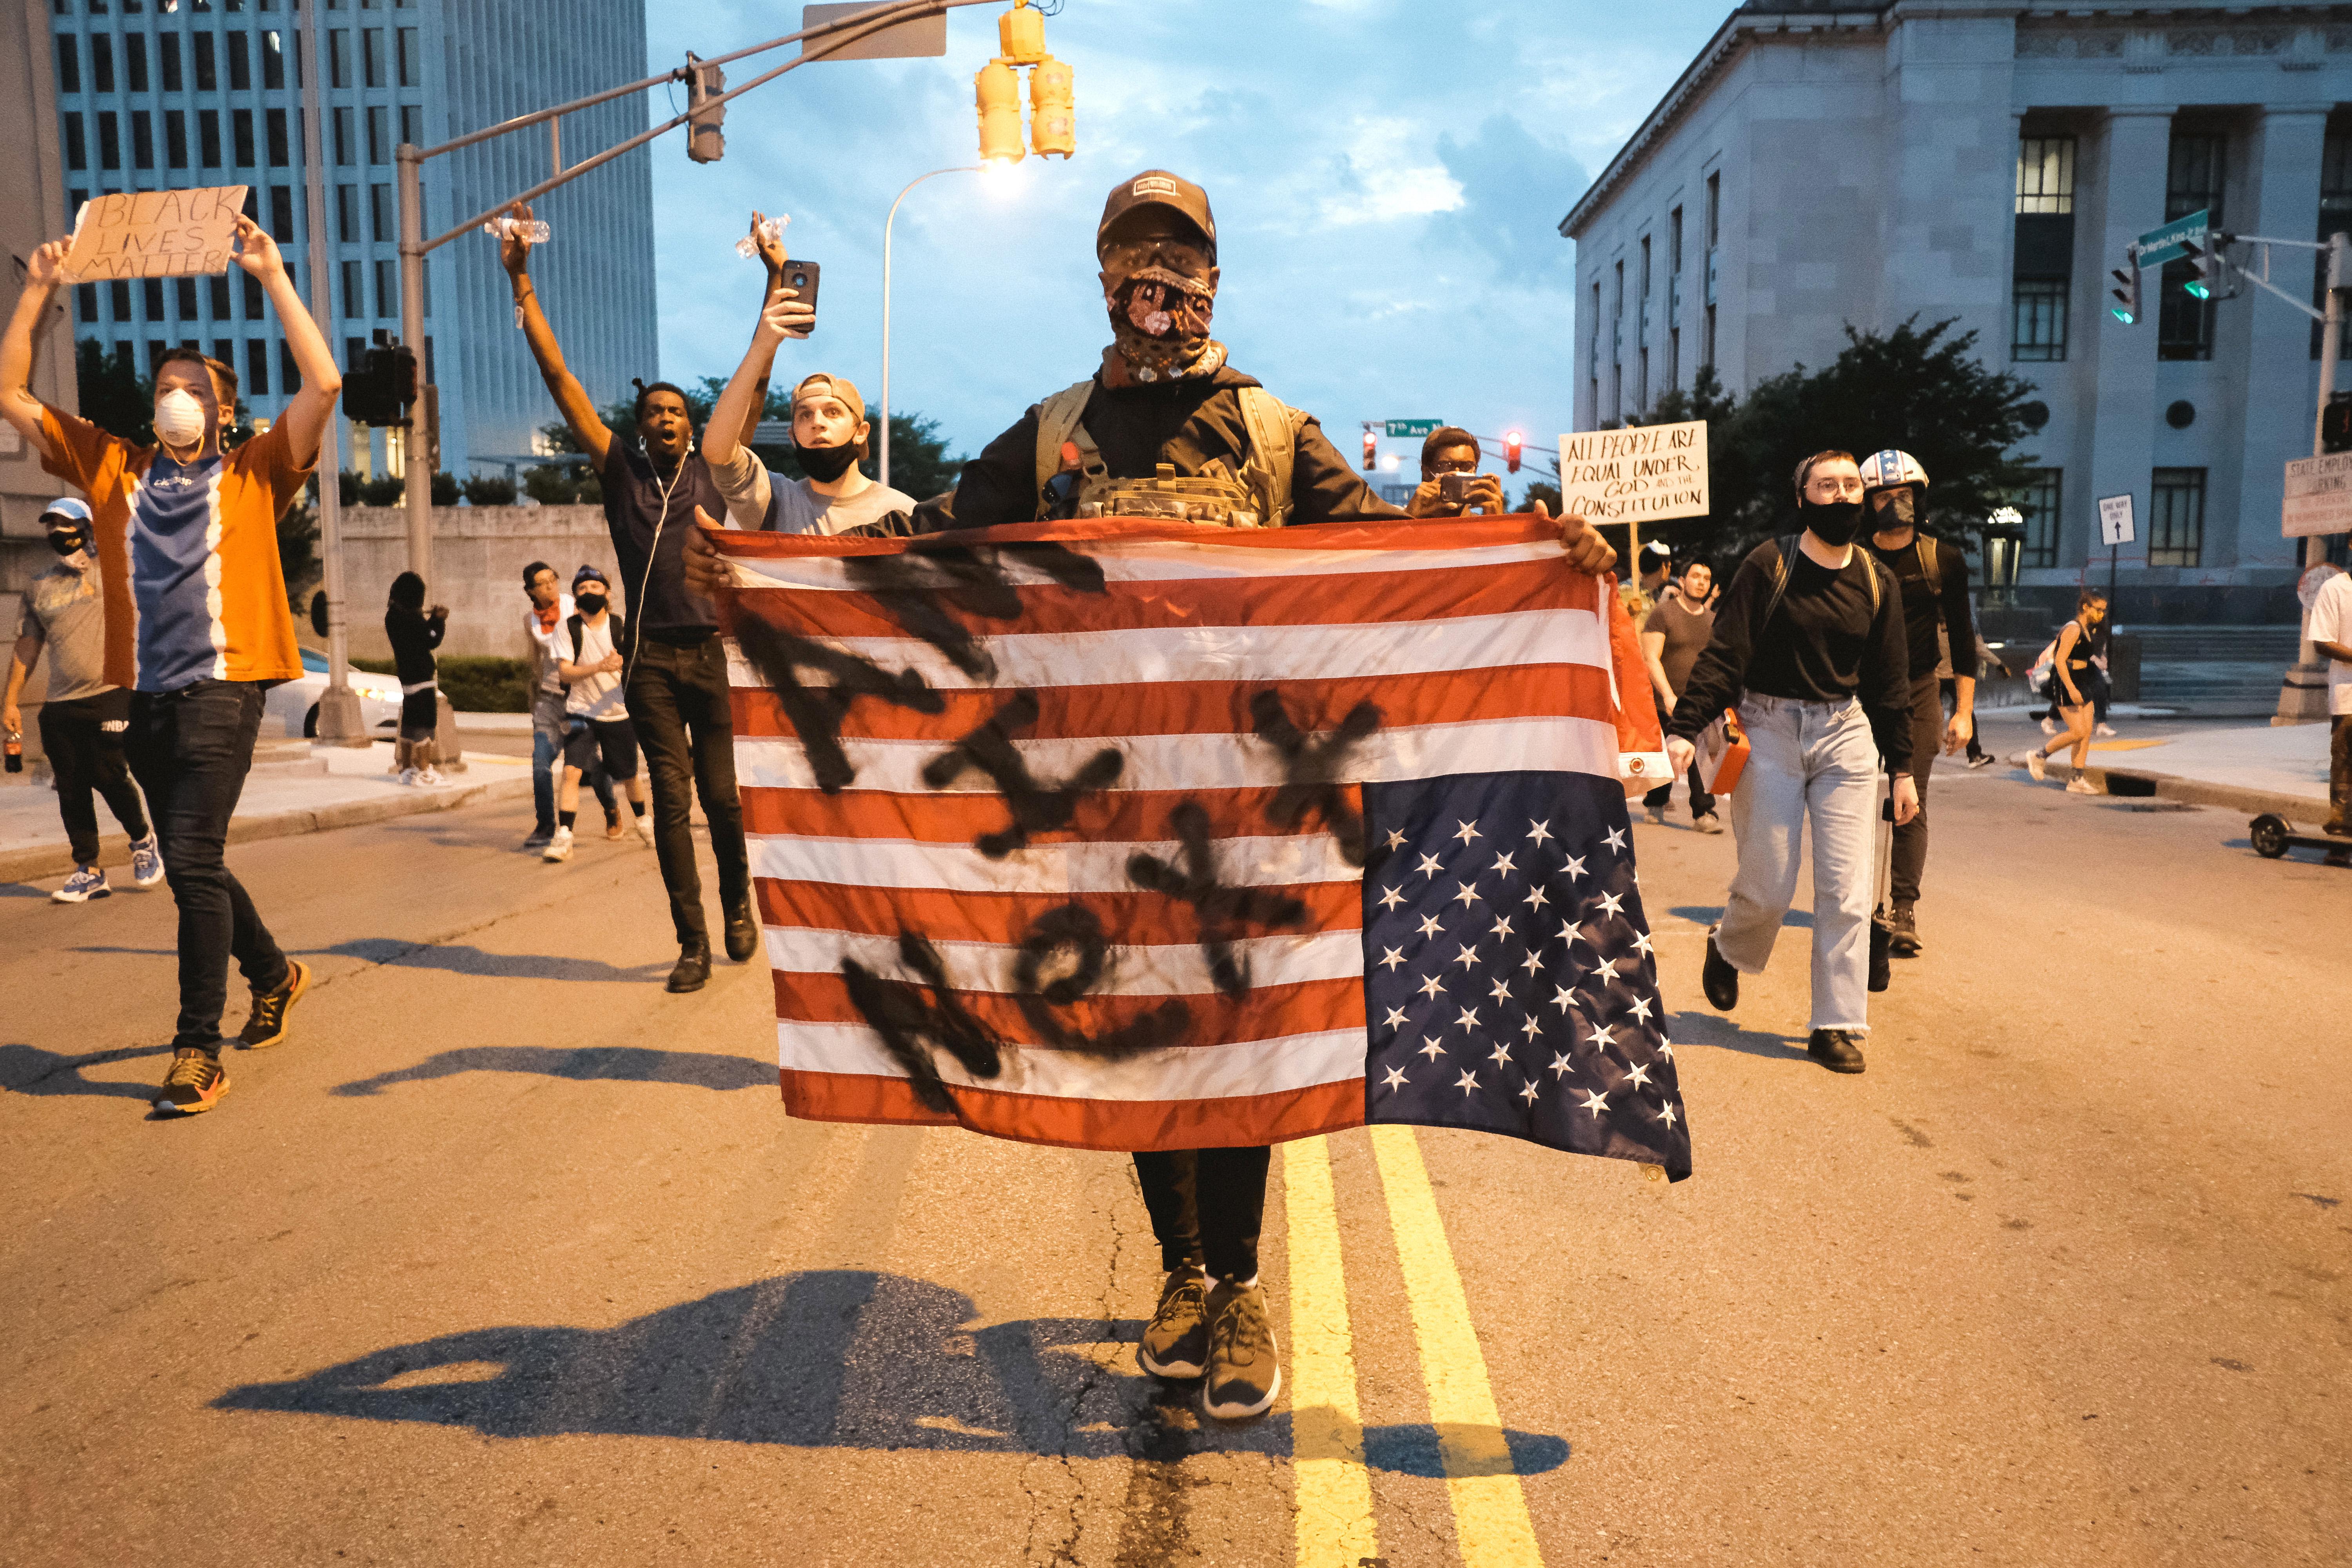 A man in a bandana holds an upside-down U.S. flag on which can be seen the words "Am I Next?" Other protesters walk on the street and hold signs behind him.